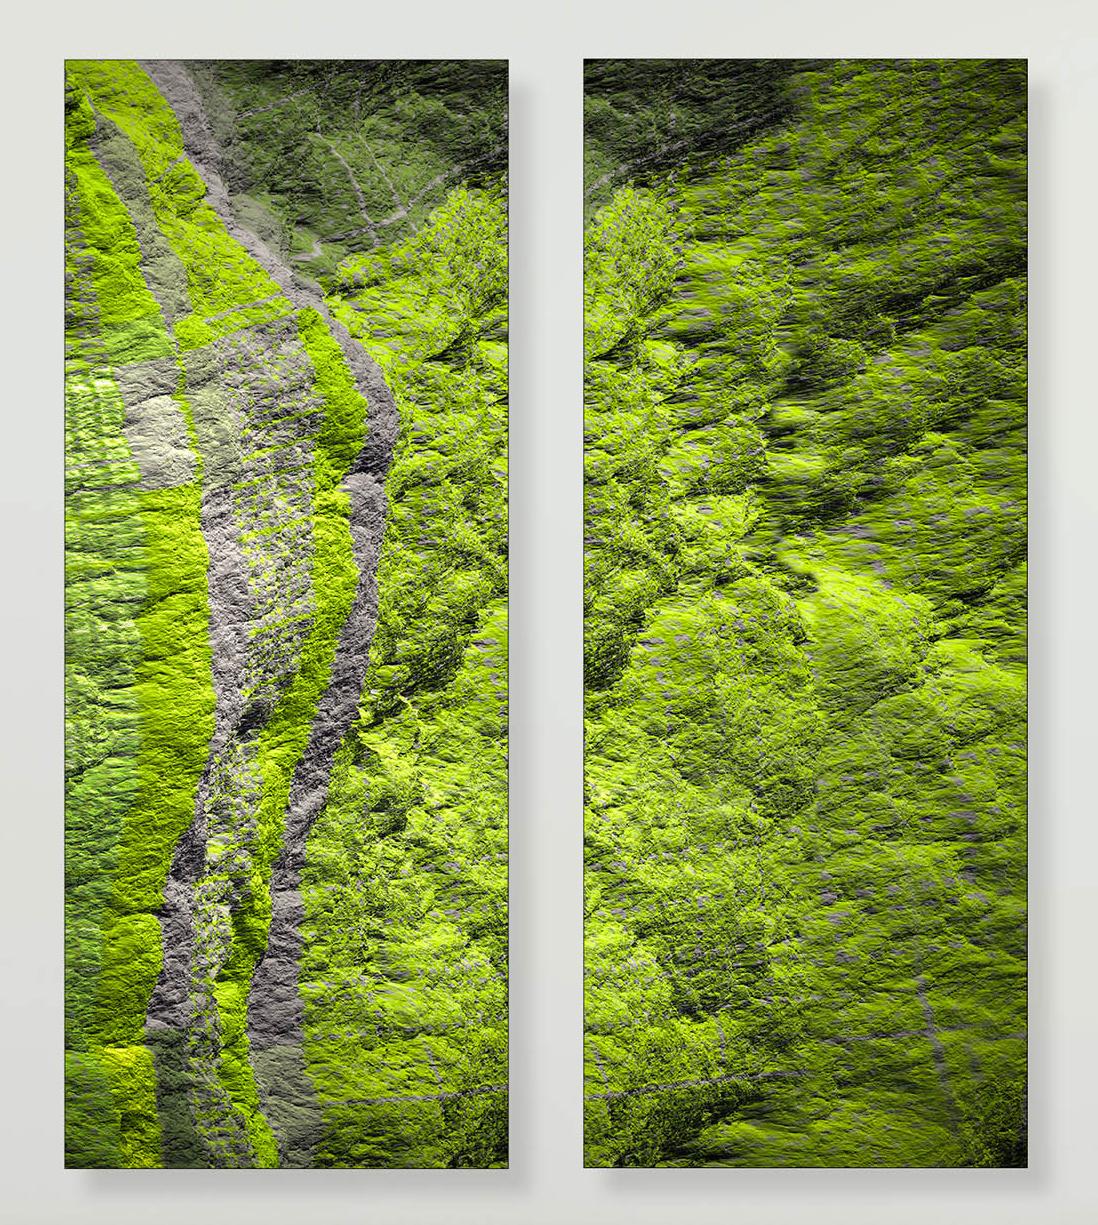 Diptych - Digital Clift - Green Forest Aerial View - Photograph by Paul-Émile Rioux